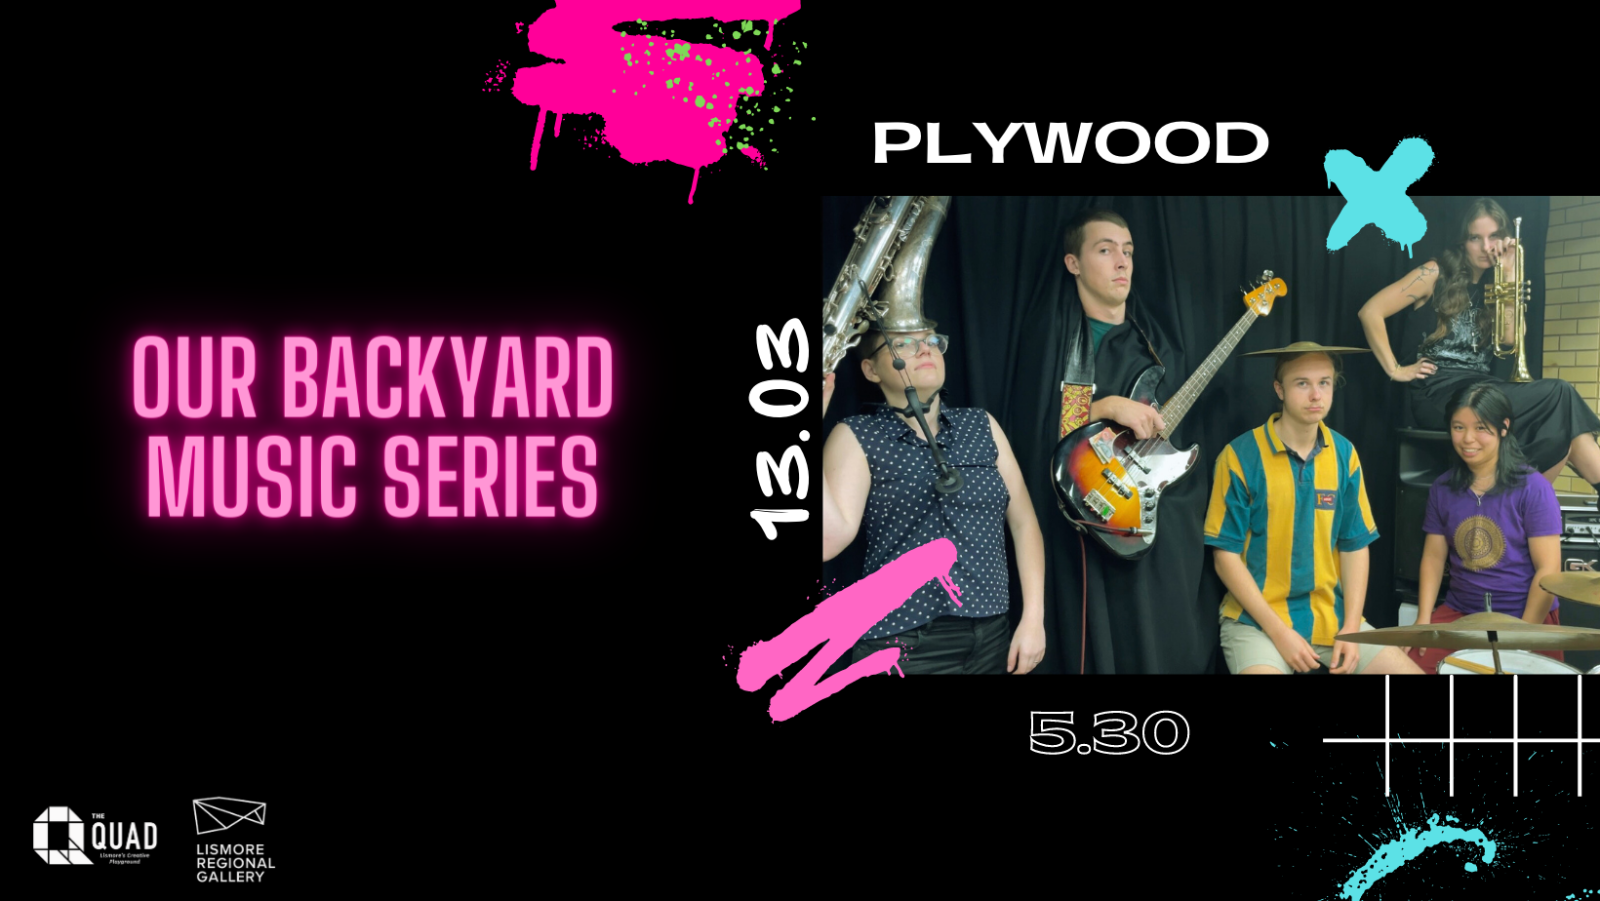 Our Backyard Music Series - Plywood Band